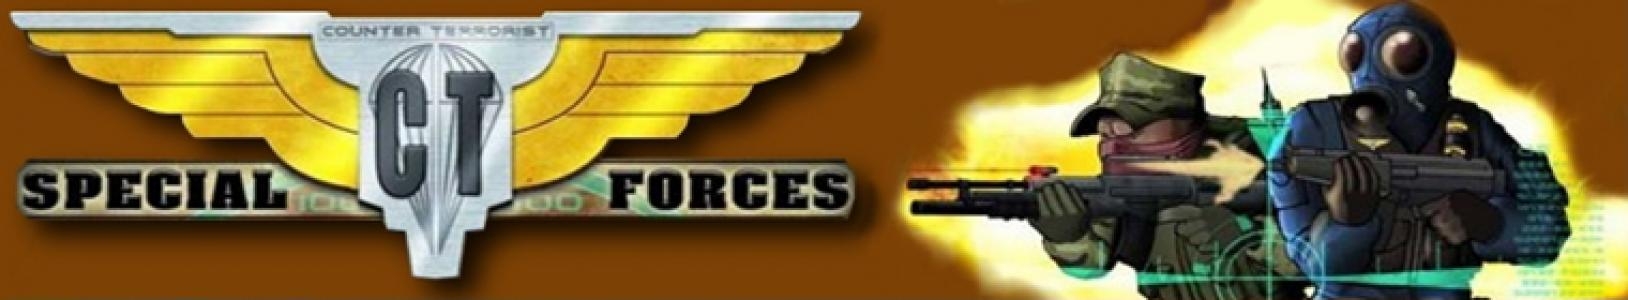 CT Special Forces banner